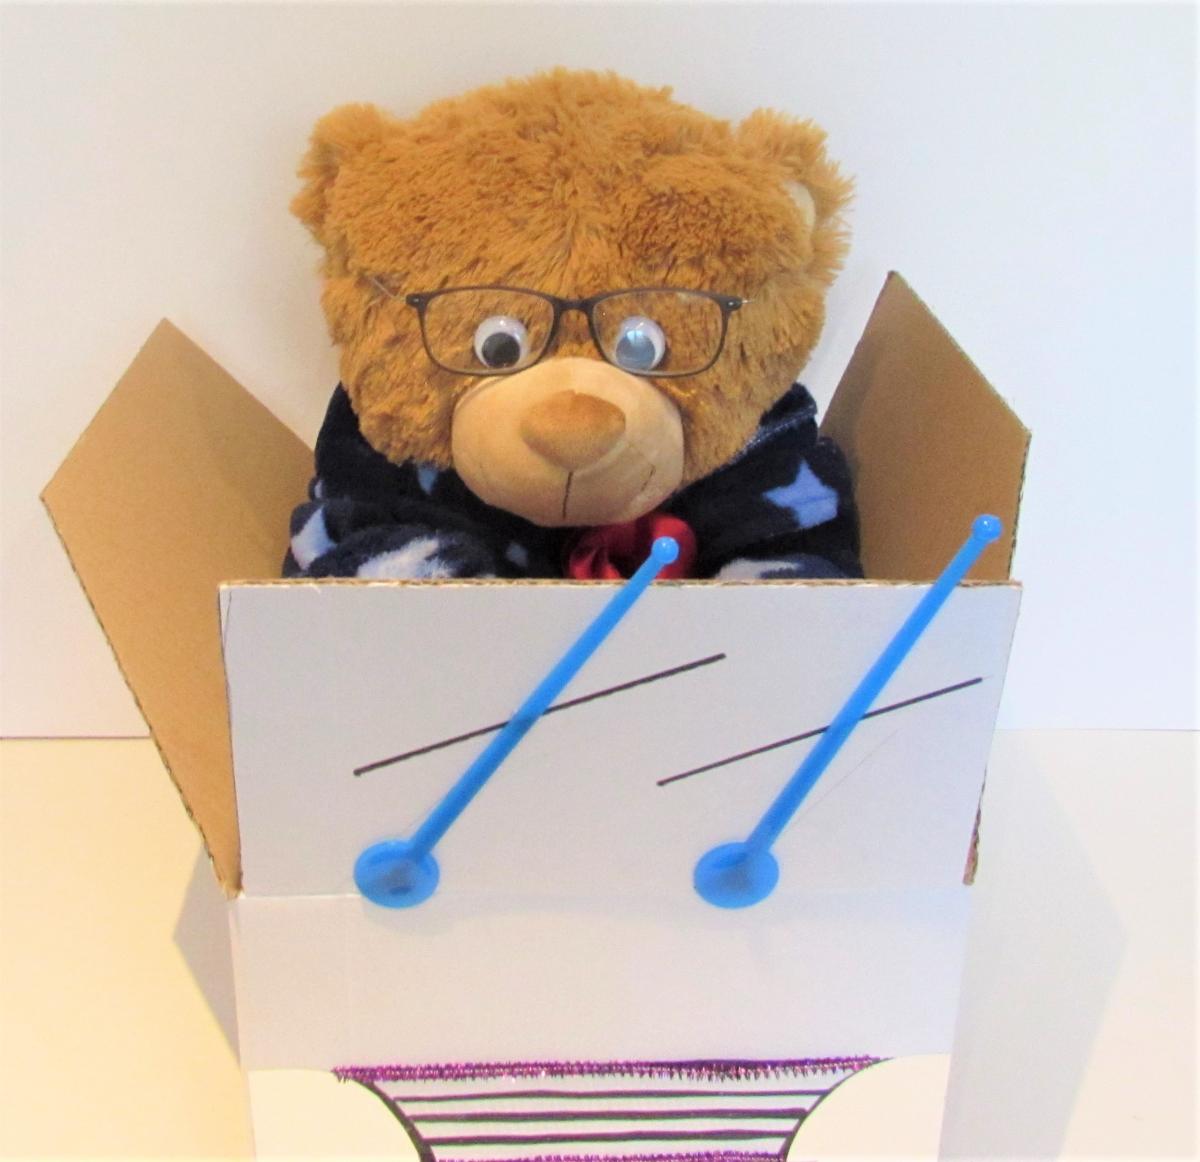 a teddy bear with glasses in a car made out of a cardboard box with windshield wipers